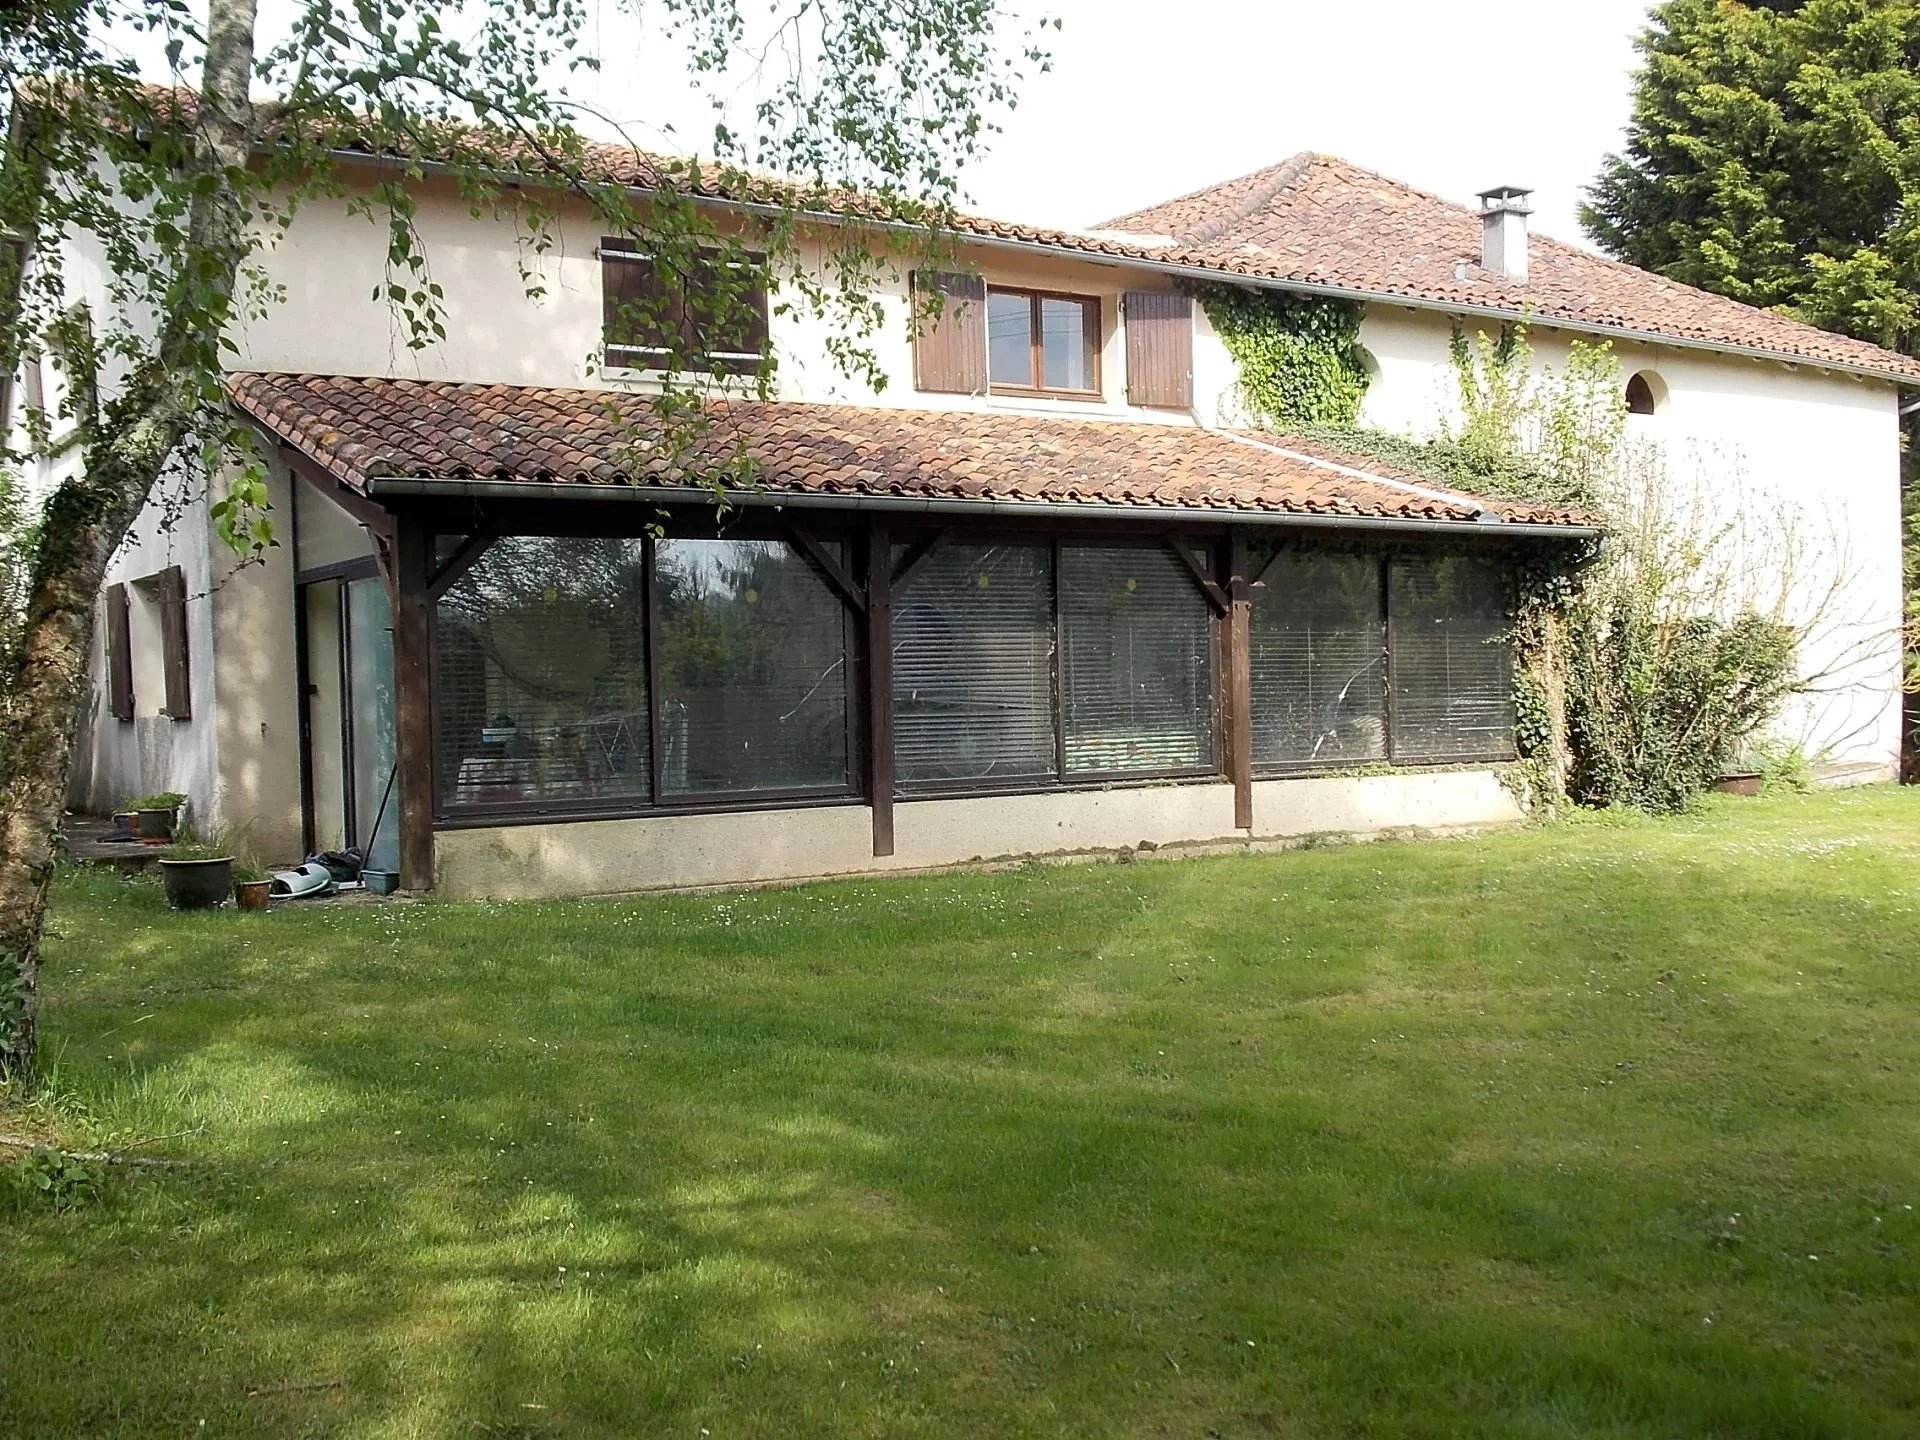 Large 4 bed house with barn, swimming pool, conservatory and garden